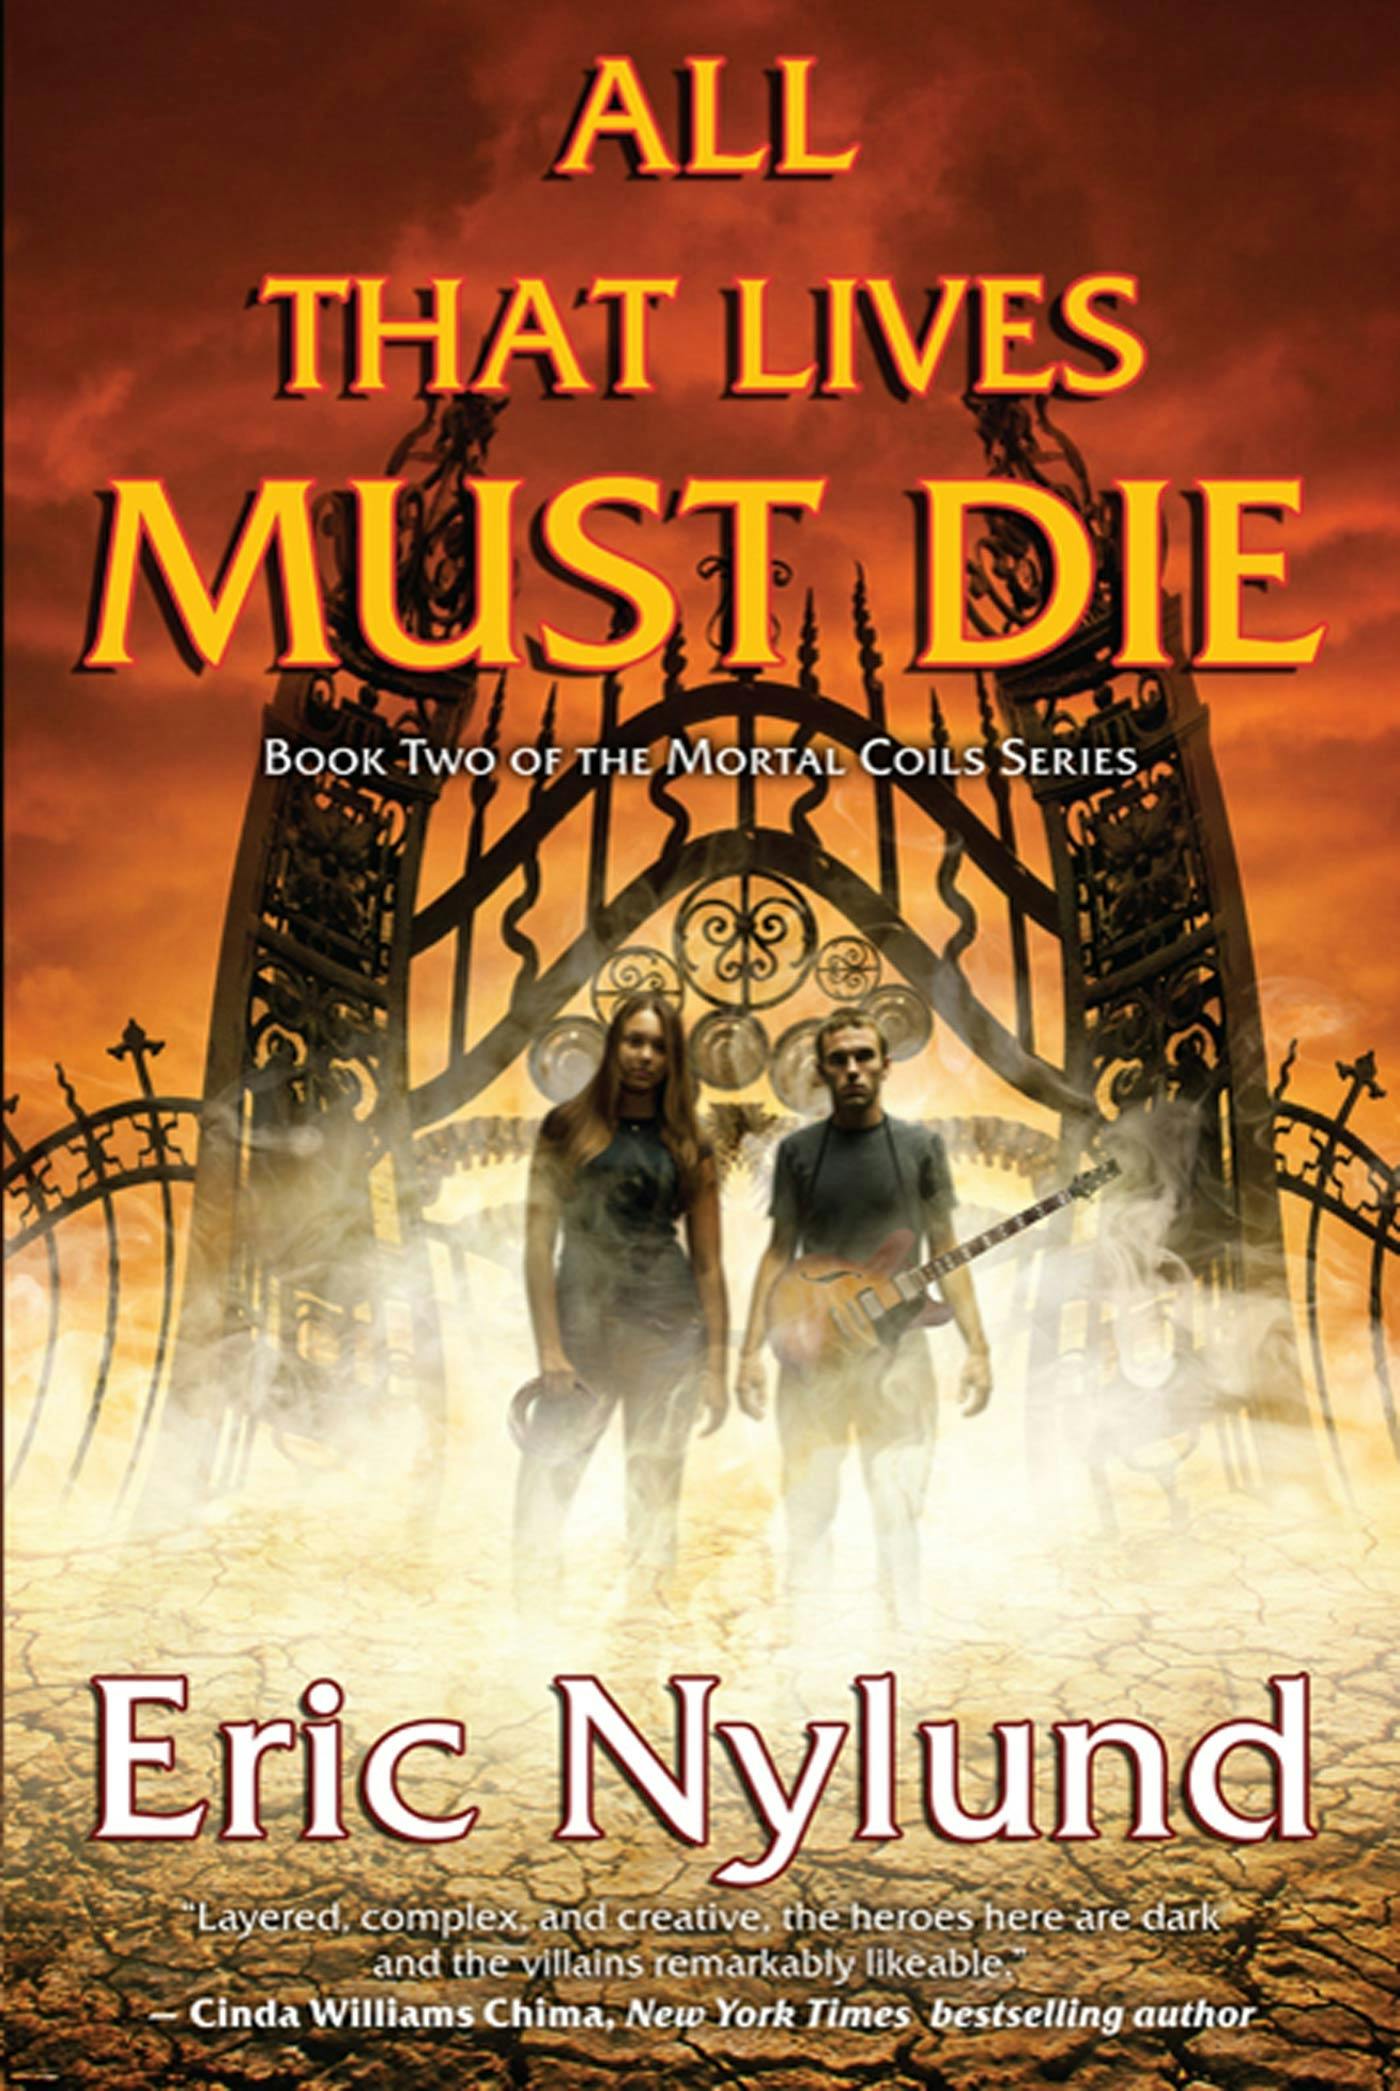 Cover for the book titled as: All That Lives Must Die